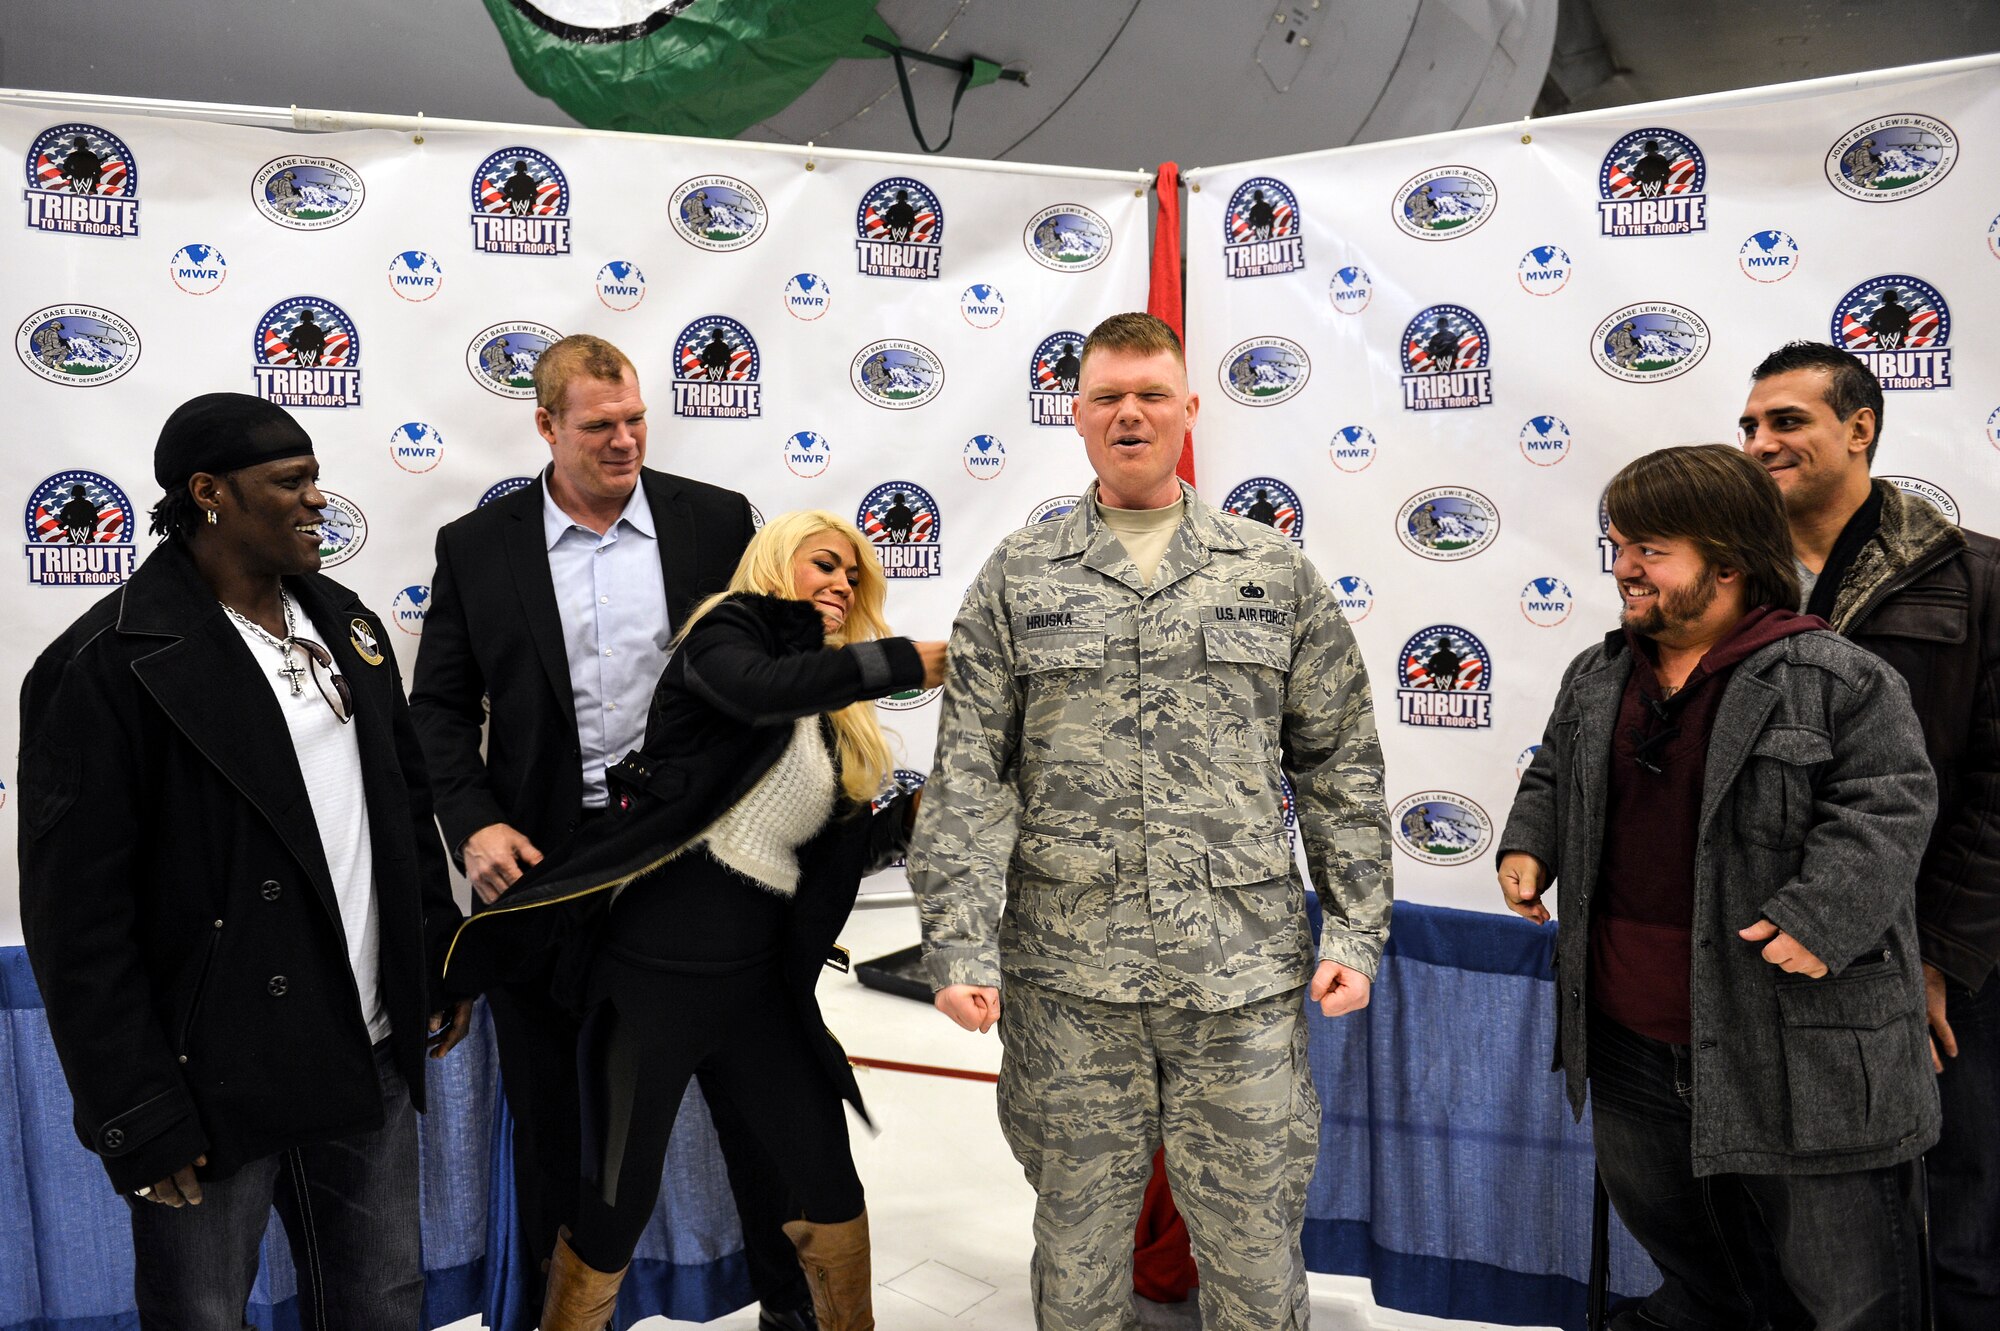 World Wrestling Entertainment Diva, Rosa Mendes, tacks on a stripe to the recently promoted Tech. Sgt. John Hruska, 627th Logistics Readiness Squadron central storage NCO in charge, Dec. 11, 2013 at Joint Base Lewis-McChord, Wash. Mendes, along with other WWE entertainers, toured McChord Field signing autographs as part of their Tribute to the Troops visit to JBLM. (U.S. Air Force photo/Staff Sgt. Jason Truskowski)